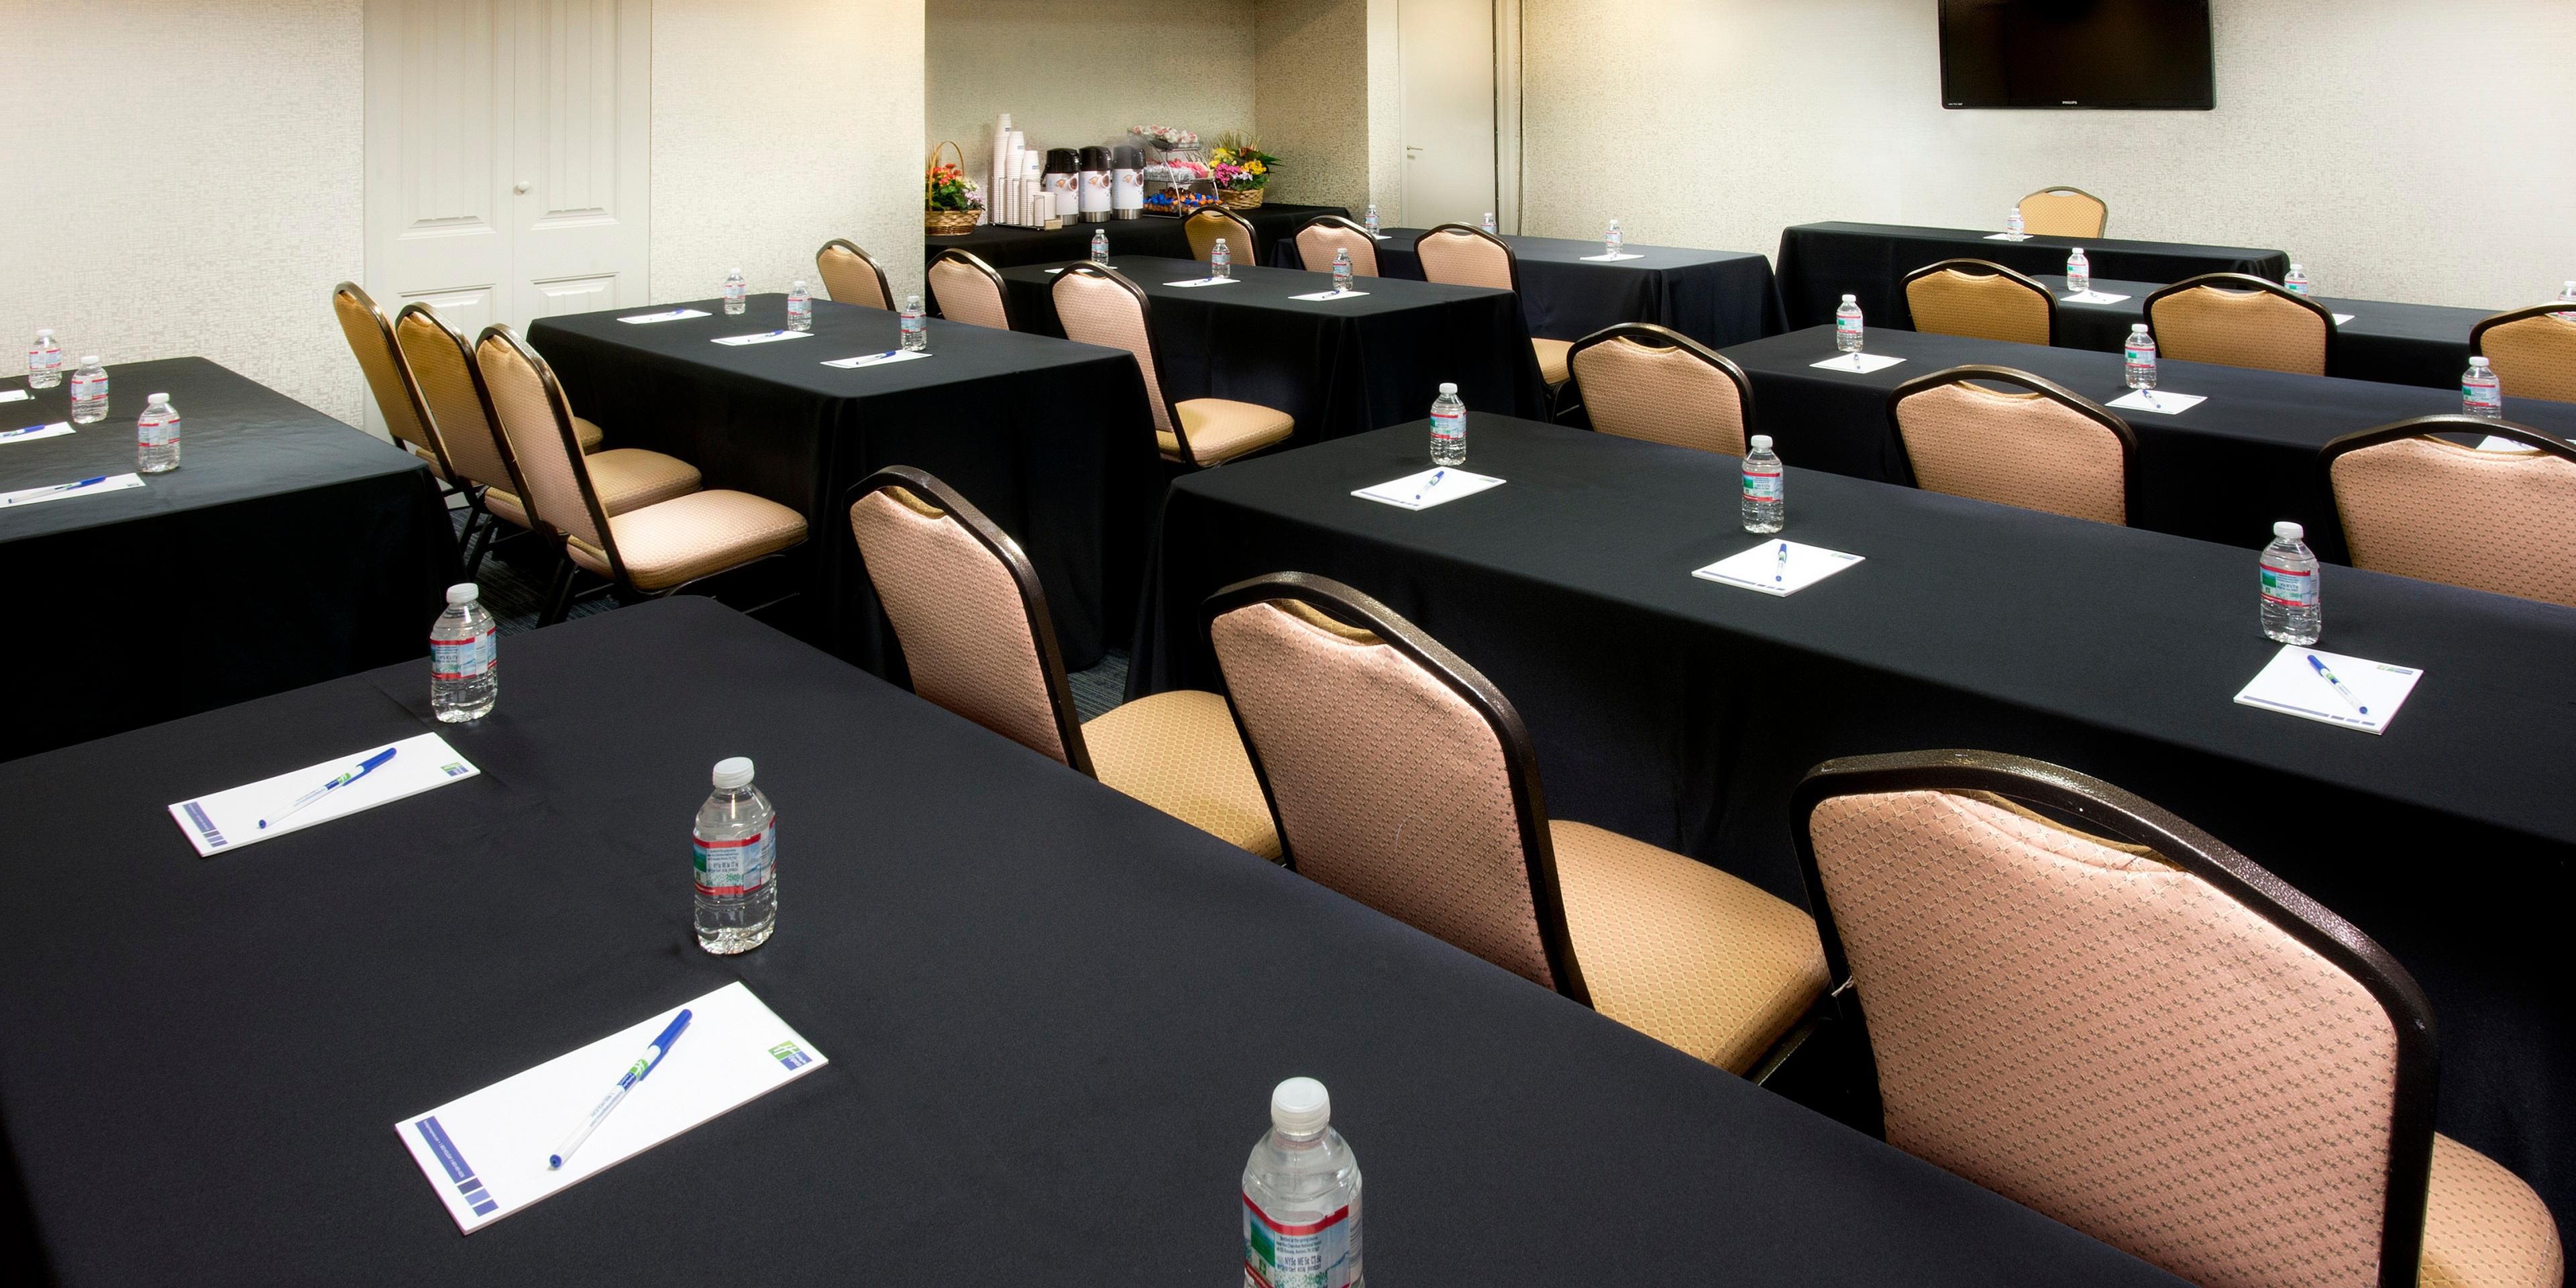 Book your block of rooms or meeting at the Holiday Inn Express Nashville Airport.  Call today for discounted pricing on groups of 10 or more rooms.